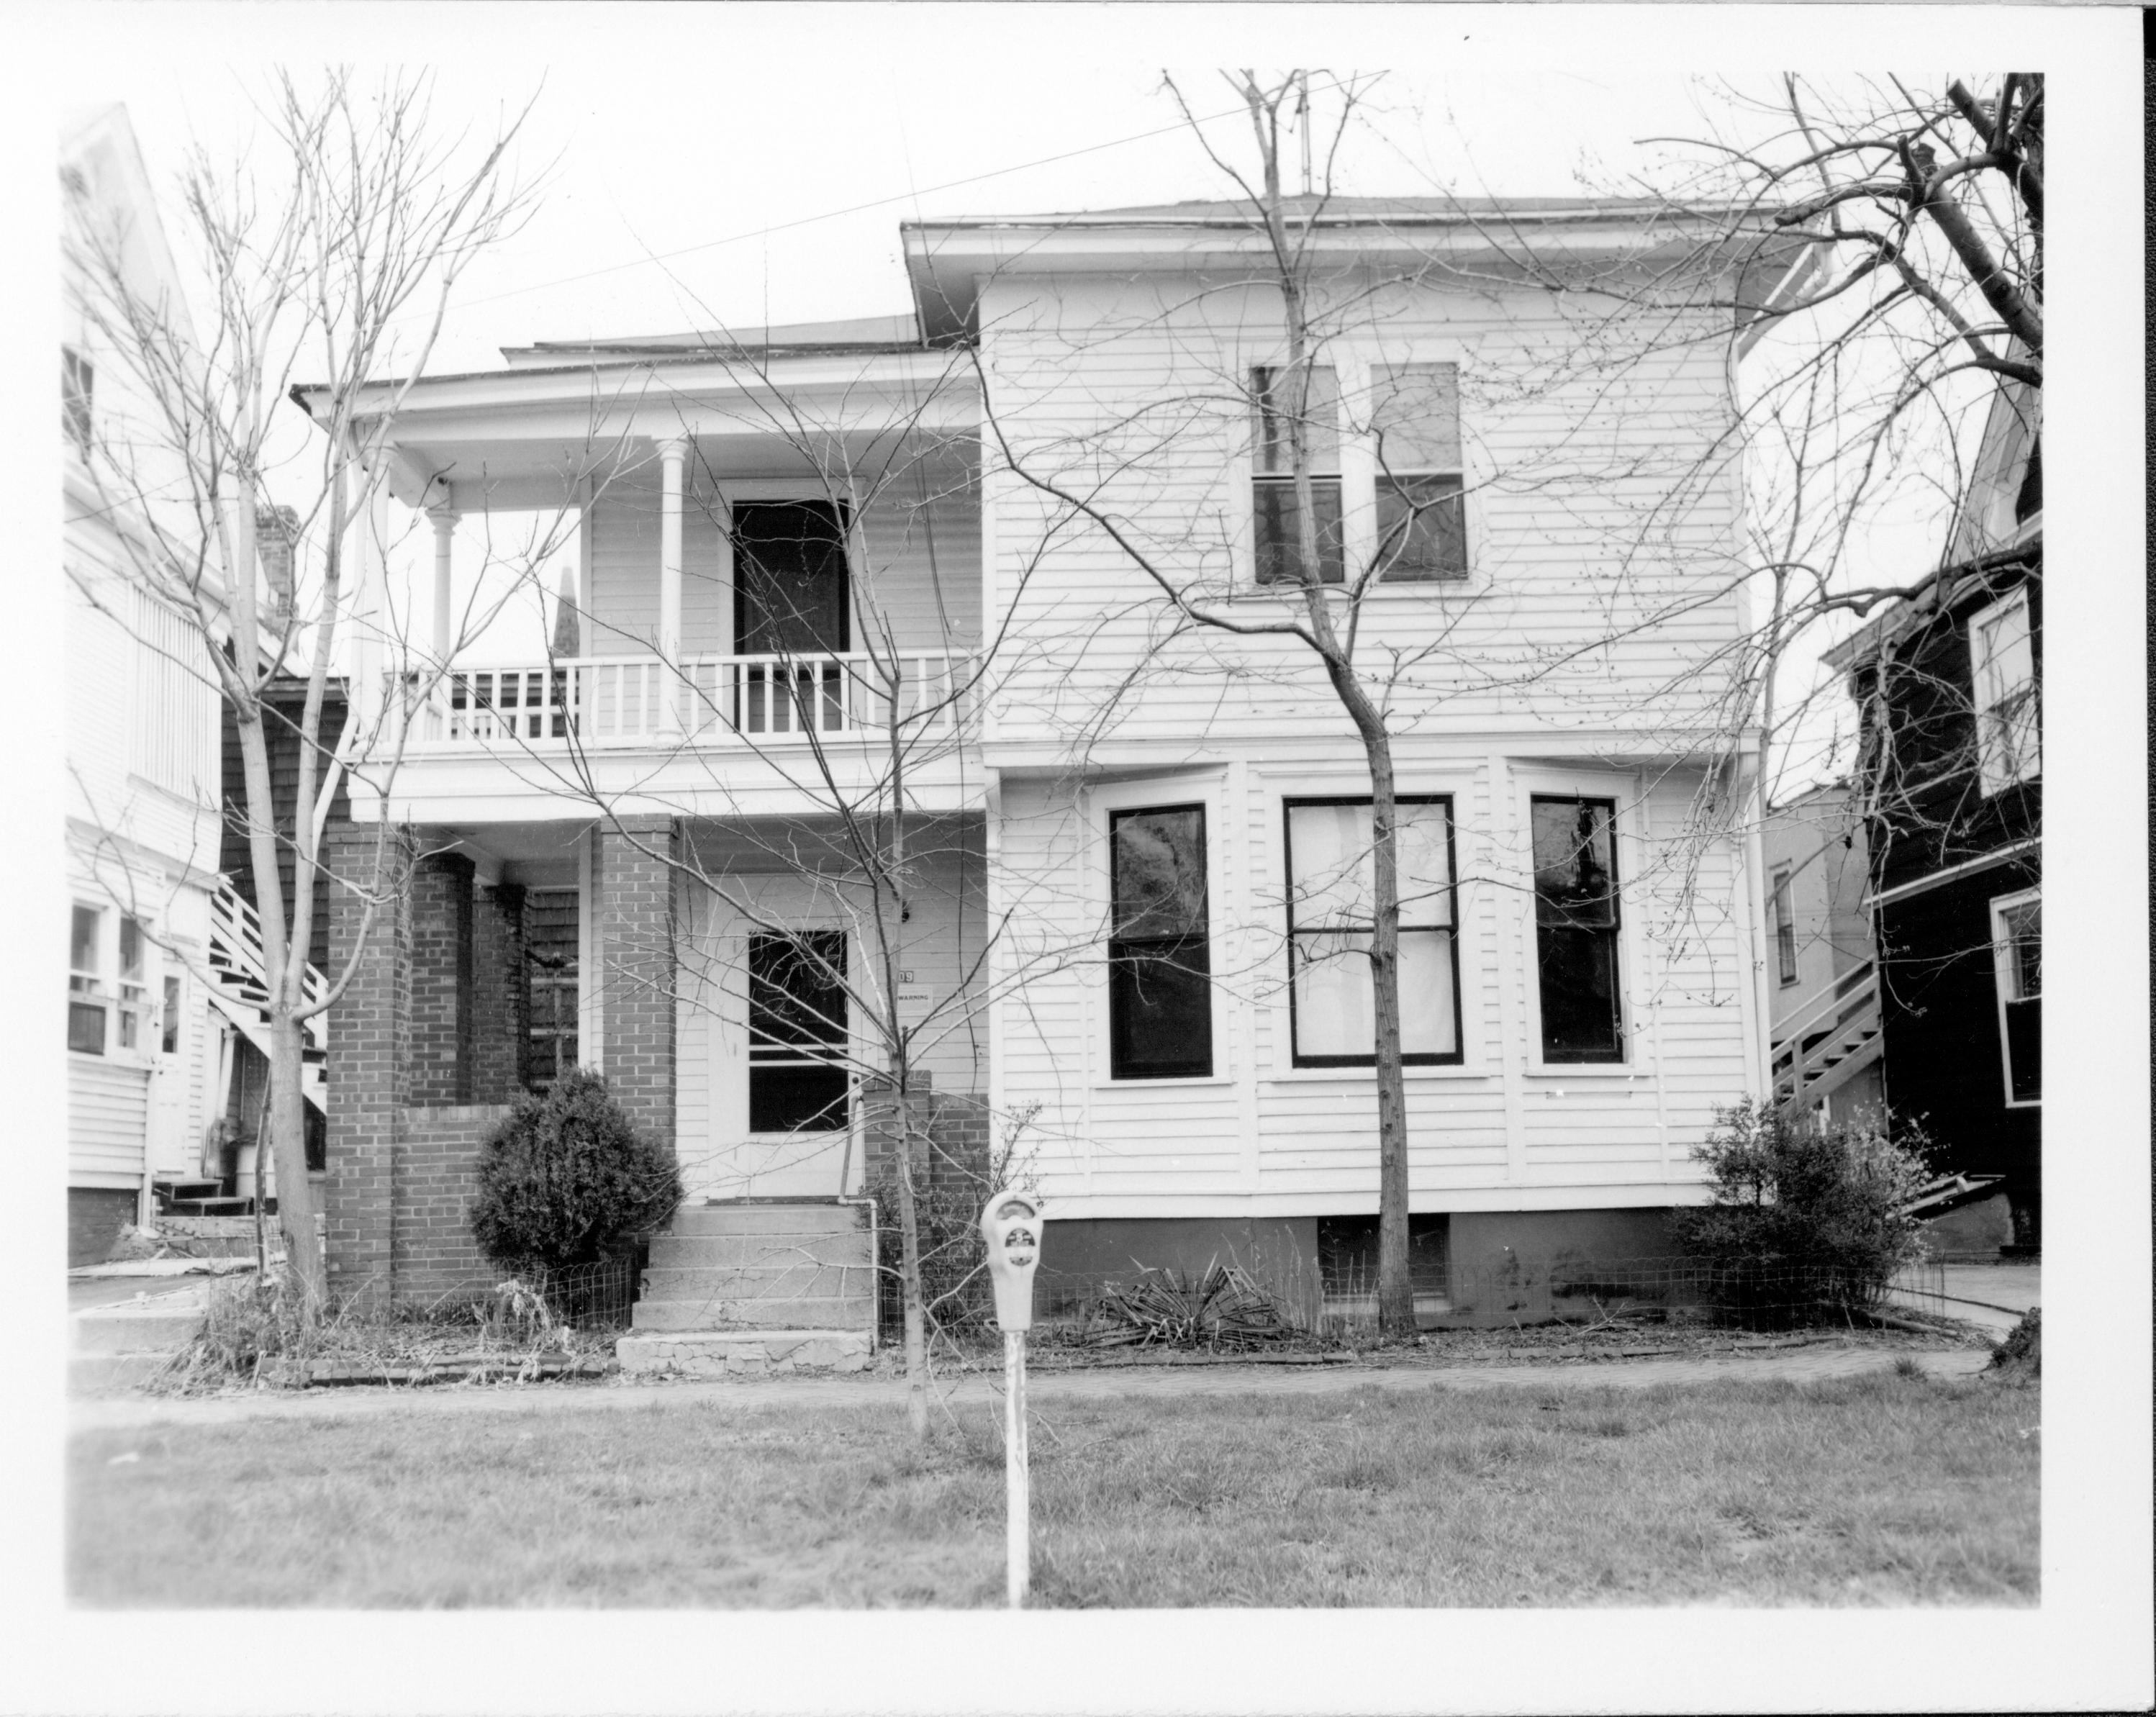 Duplex apartment owned by William Sheeham, Block 7, Lot 8 along Jackson Street.  Area is Visitor Center now.  William Hermes owned houses on either side. Looking North from Jackson Street. Sheeham, Hermes, Jackson Street, Visitor Center